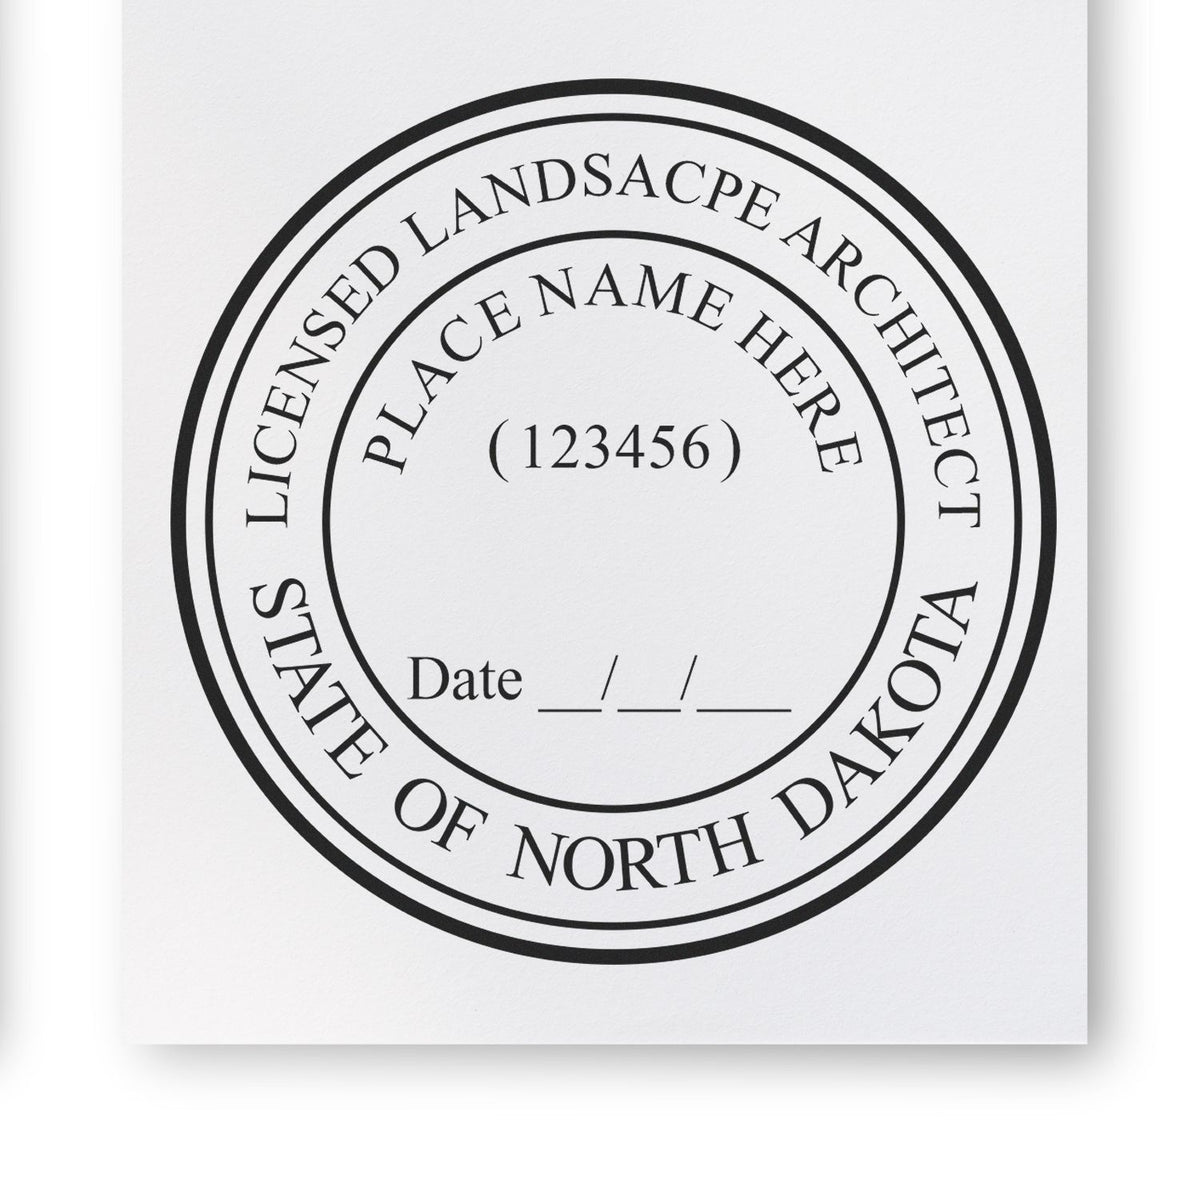 A photograph of the Self-Inking North Dakota Landscape Architect Stamp stamp impression reveals a vivid, professional image of the on paper.